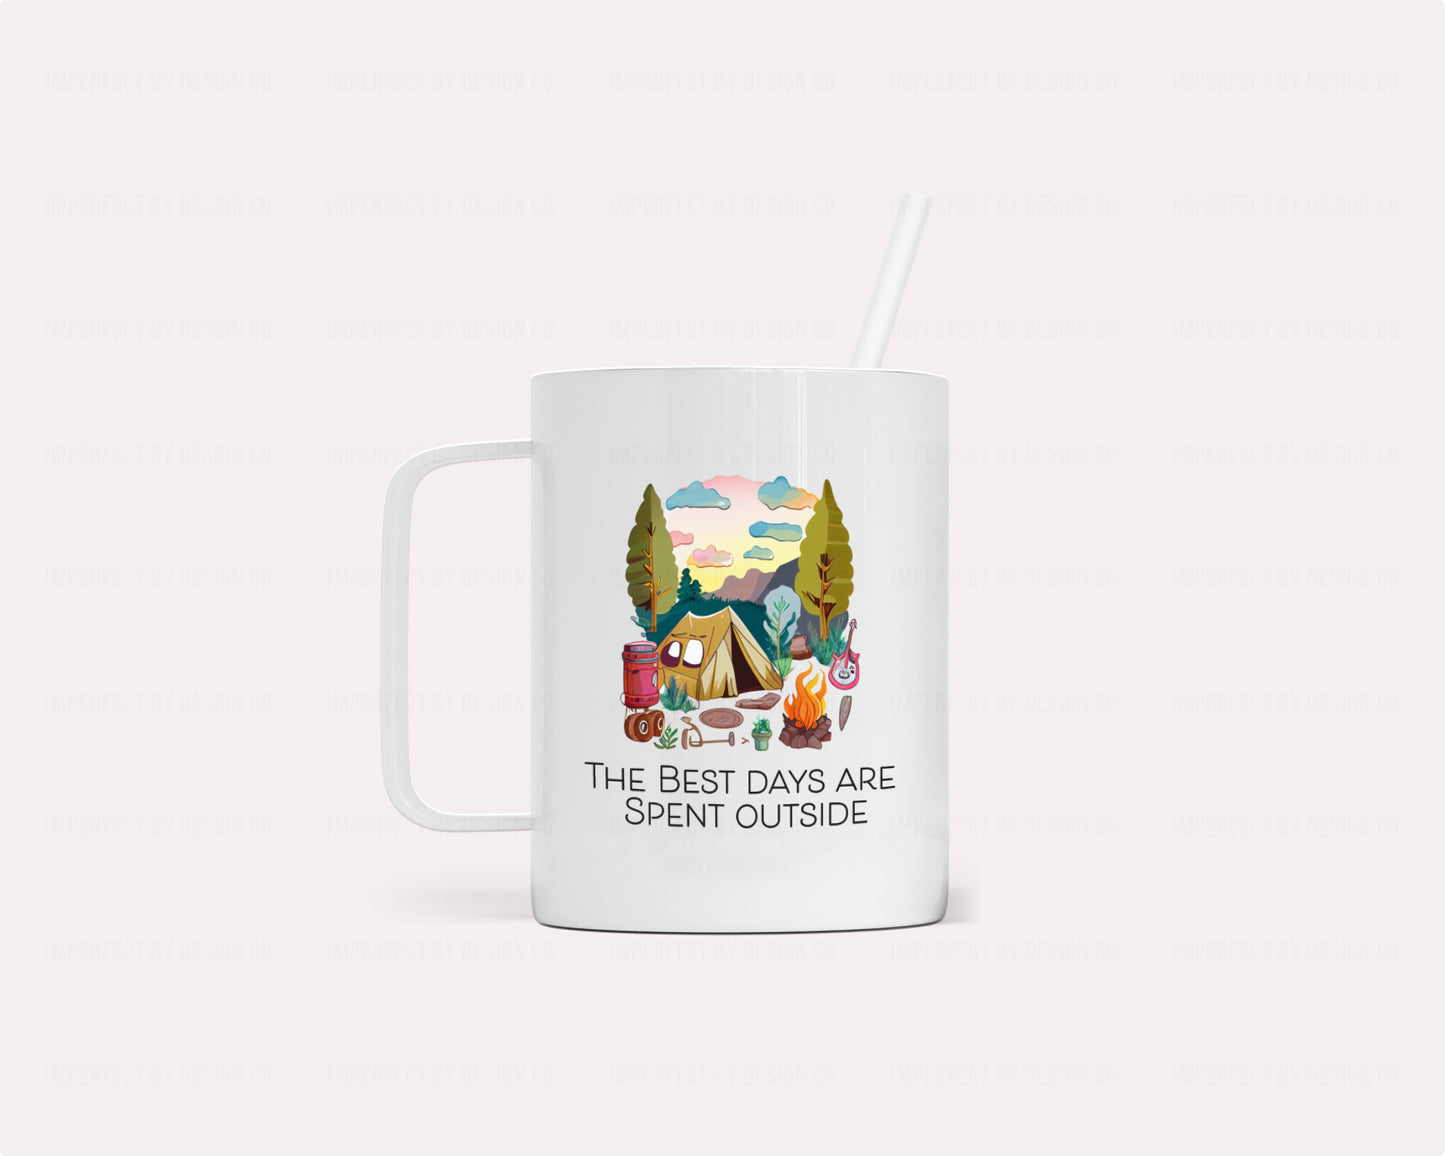 Wilderness Wanderlust camper mug with "The best days are spent outside" phrase | imperfect by design co